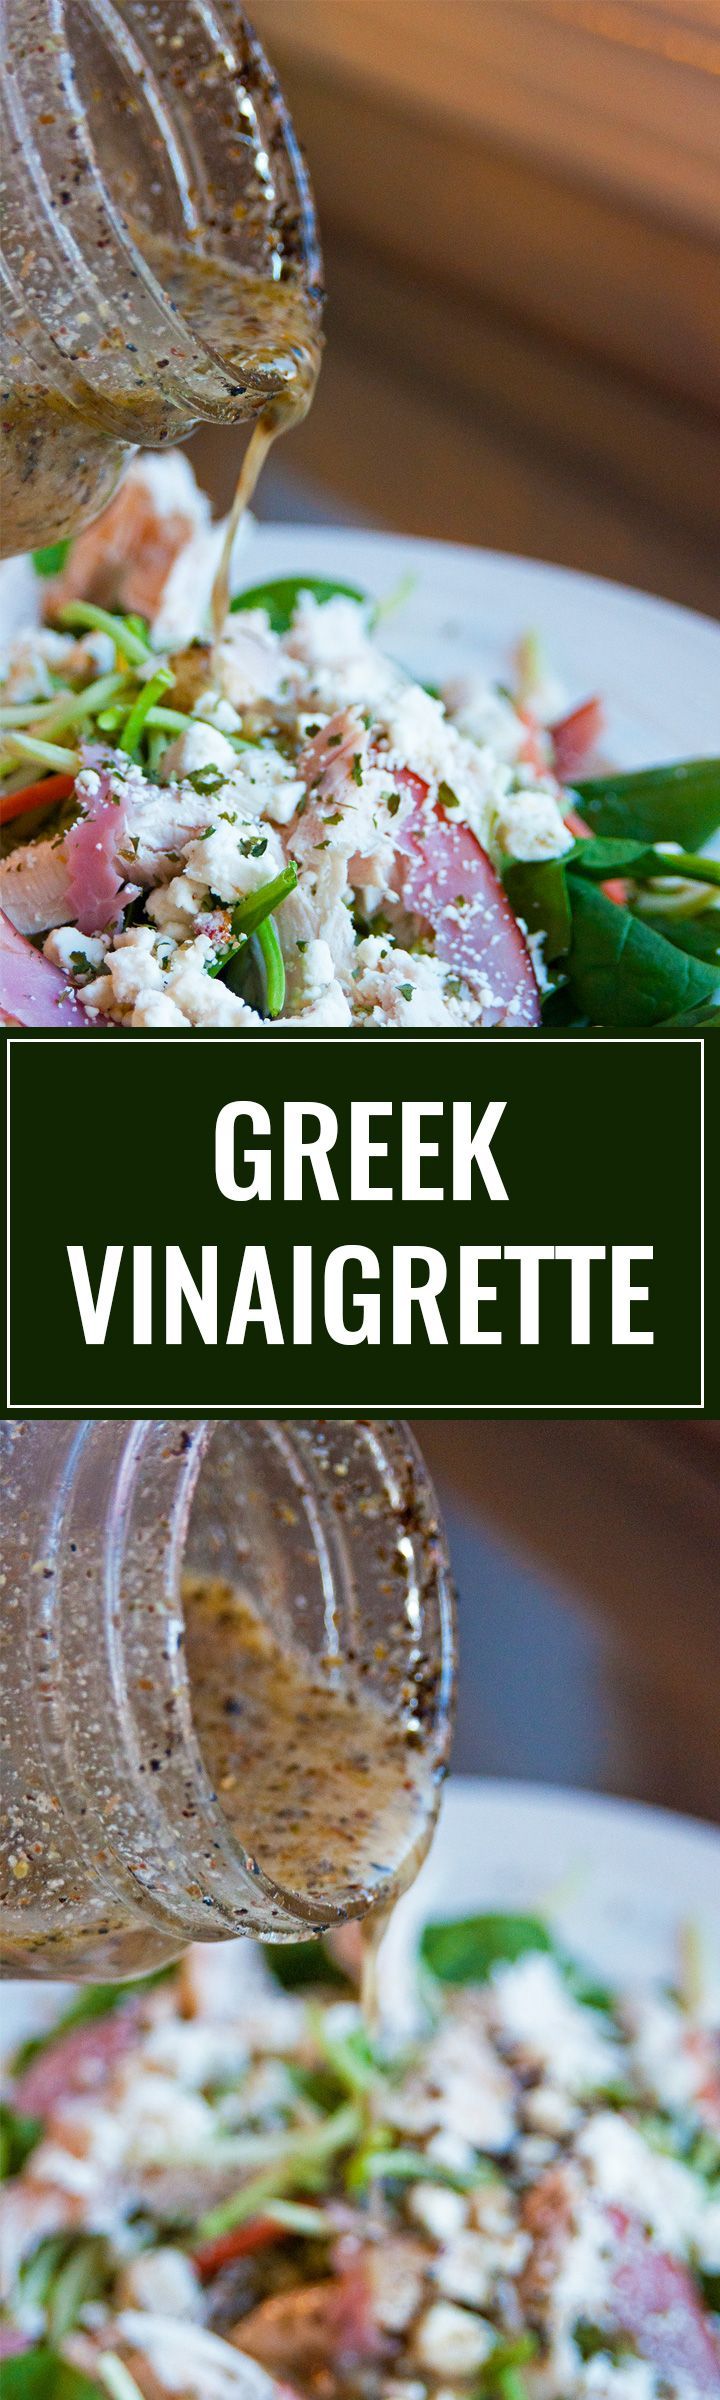 Homemade Greek Vinaigrette. This homemade salad dressing is delicious over salads, as a marinade and on a greek pizza! This